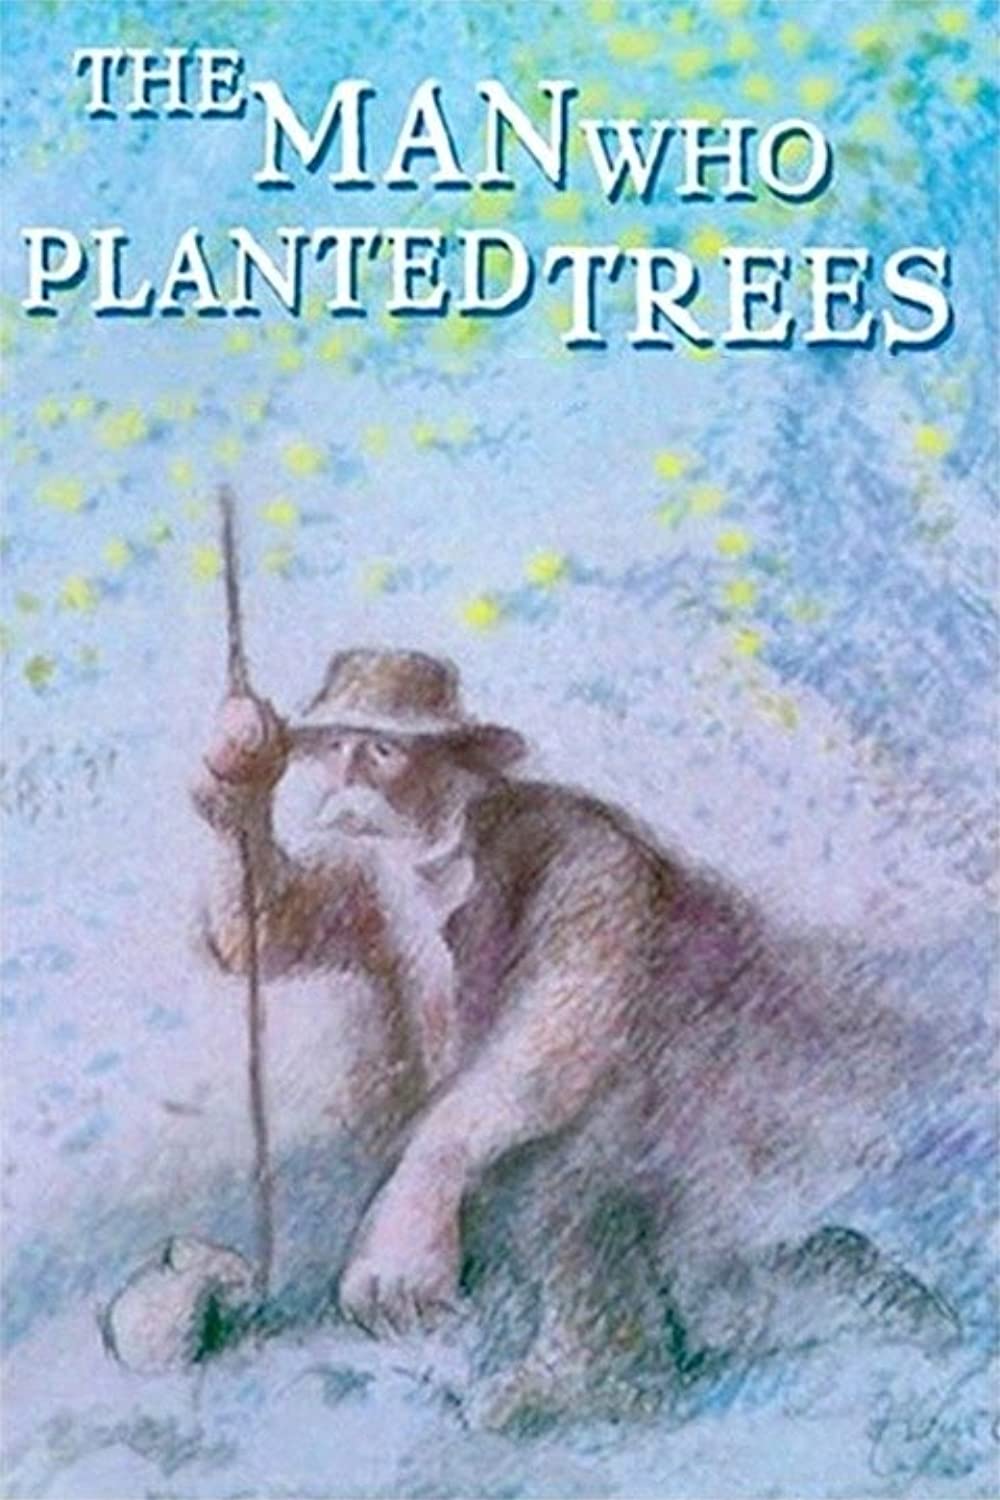 The Man Who Planted Trees (Short 1987)